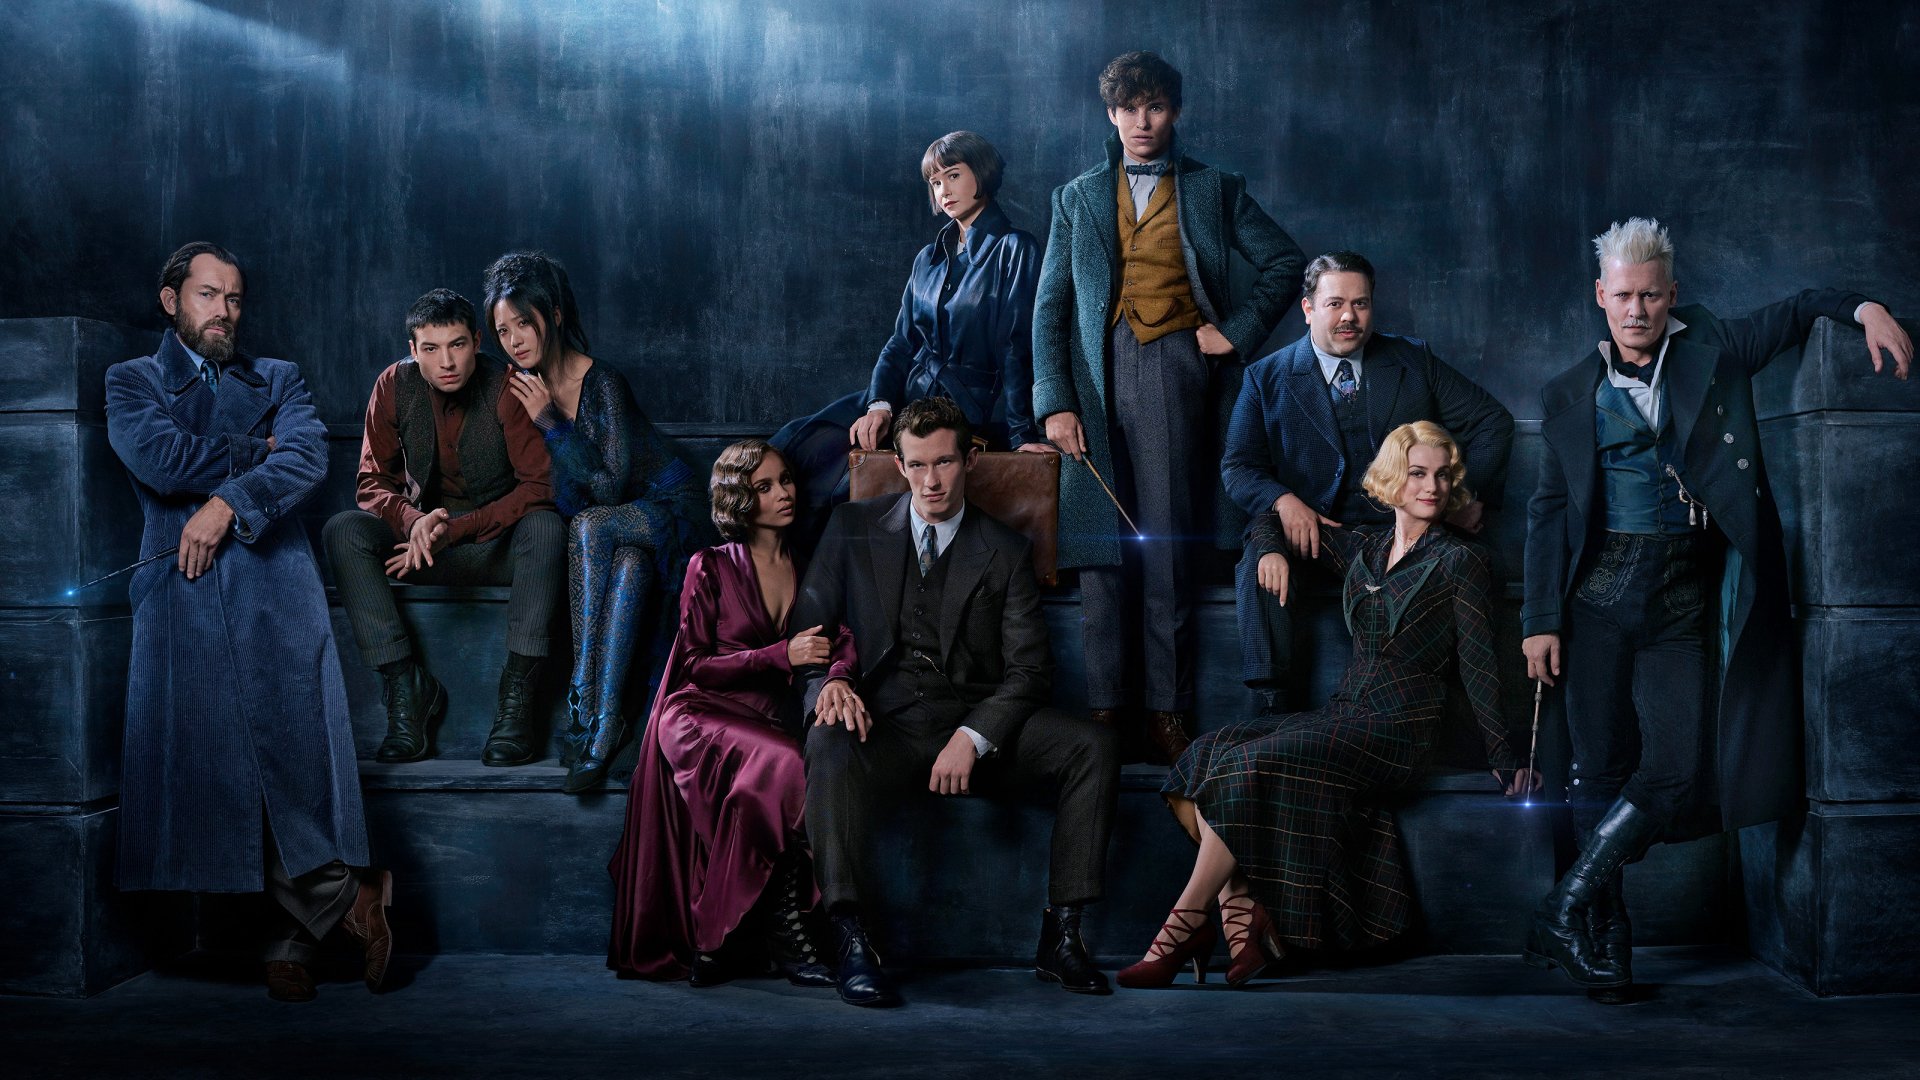 People 1920x1080 movies women men Fantastic Beasts: The Crimes of Grindelwald Katherine Waterston Johnny Depp wizarding world